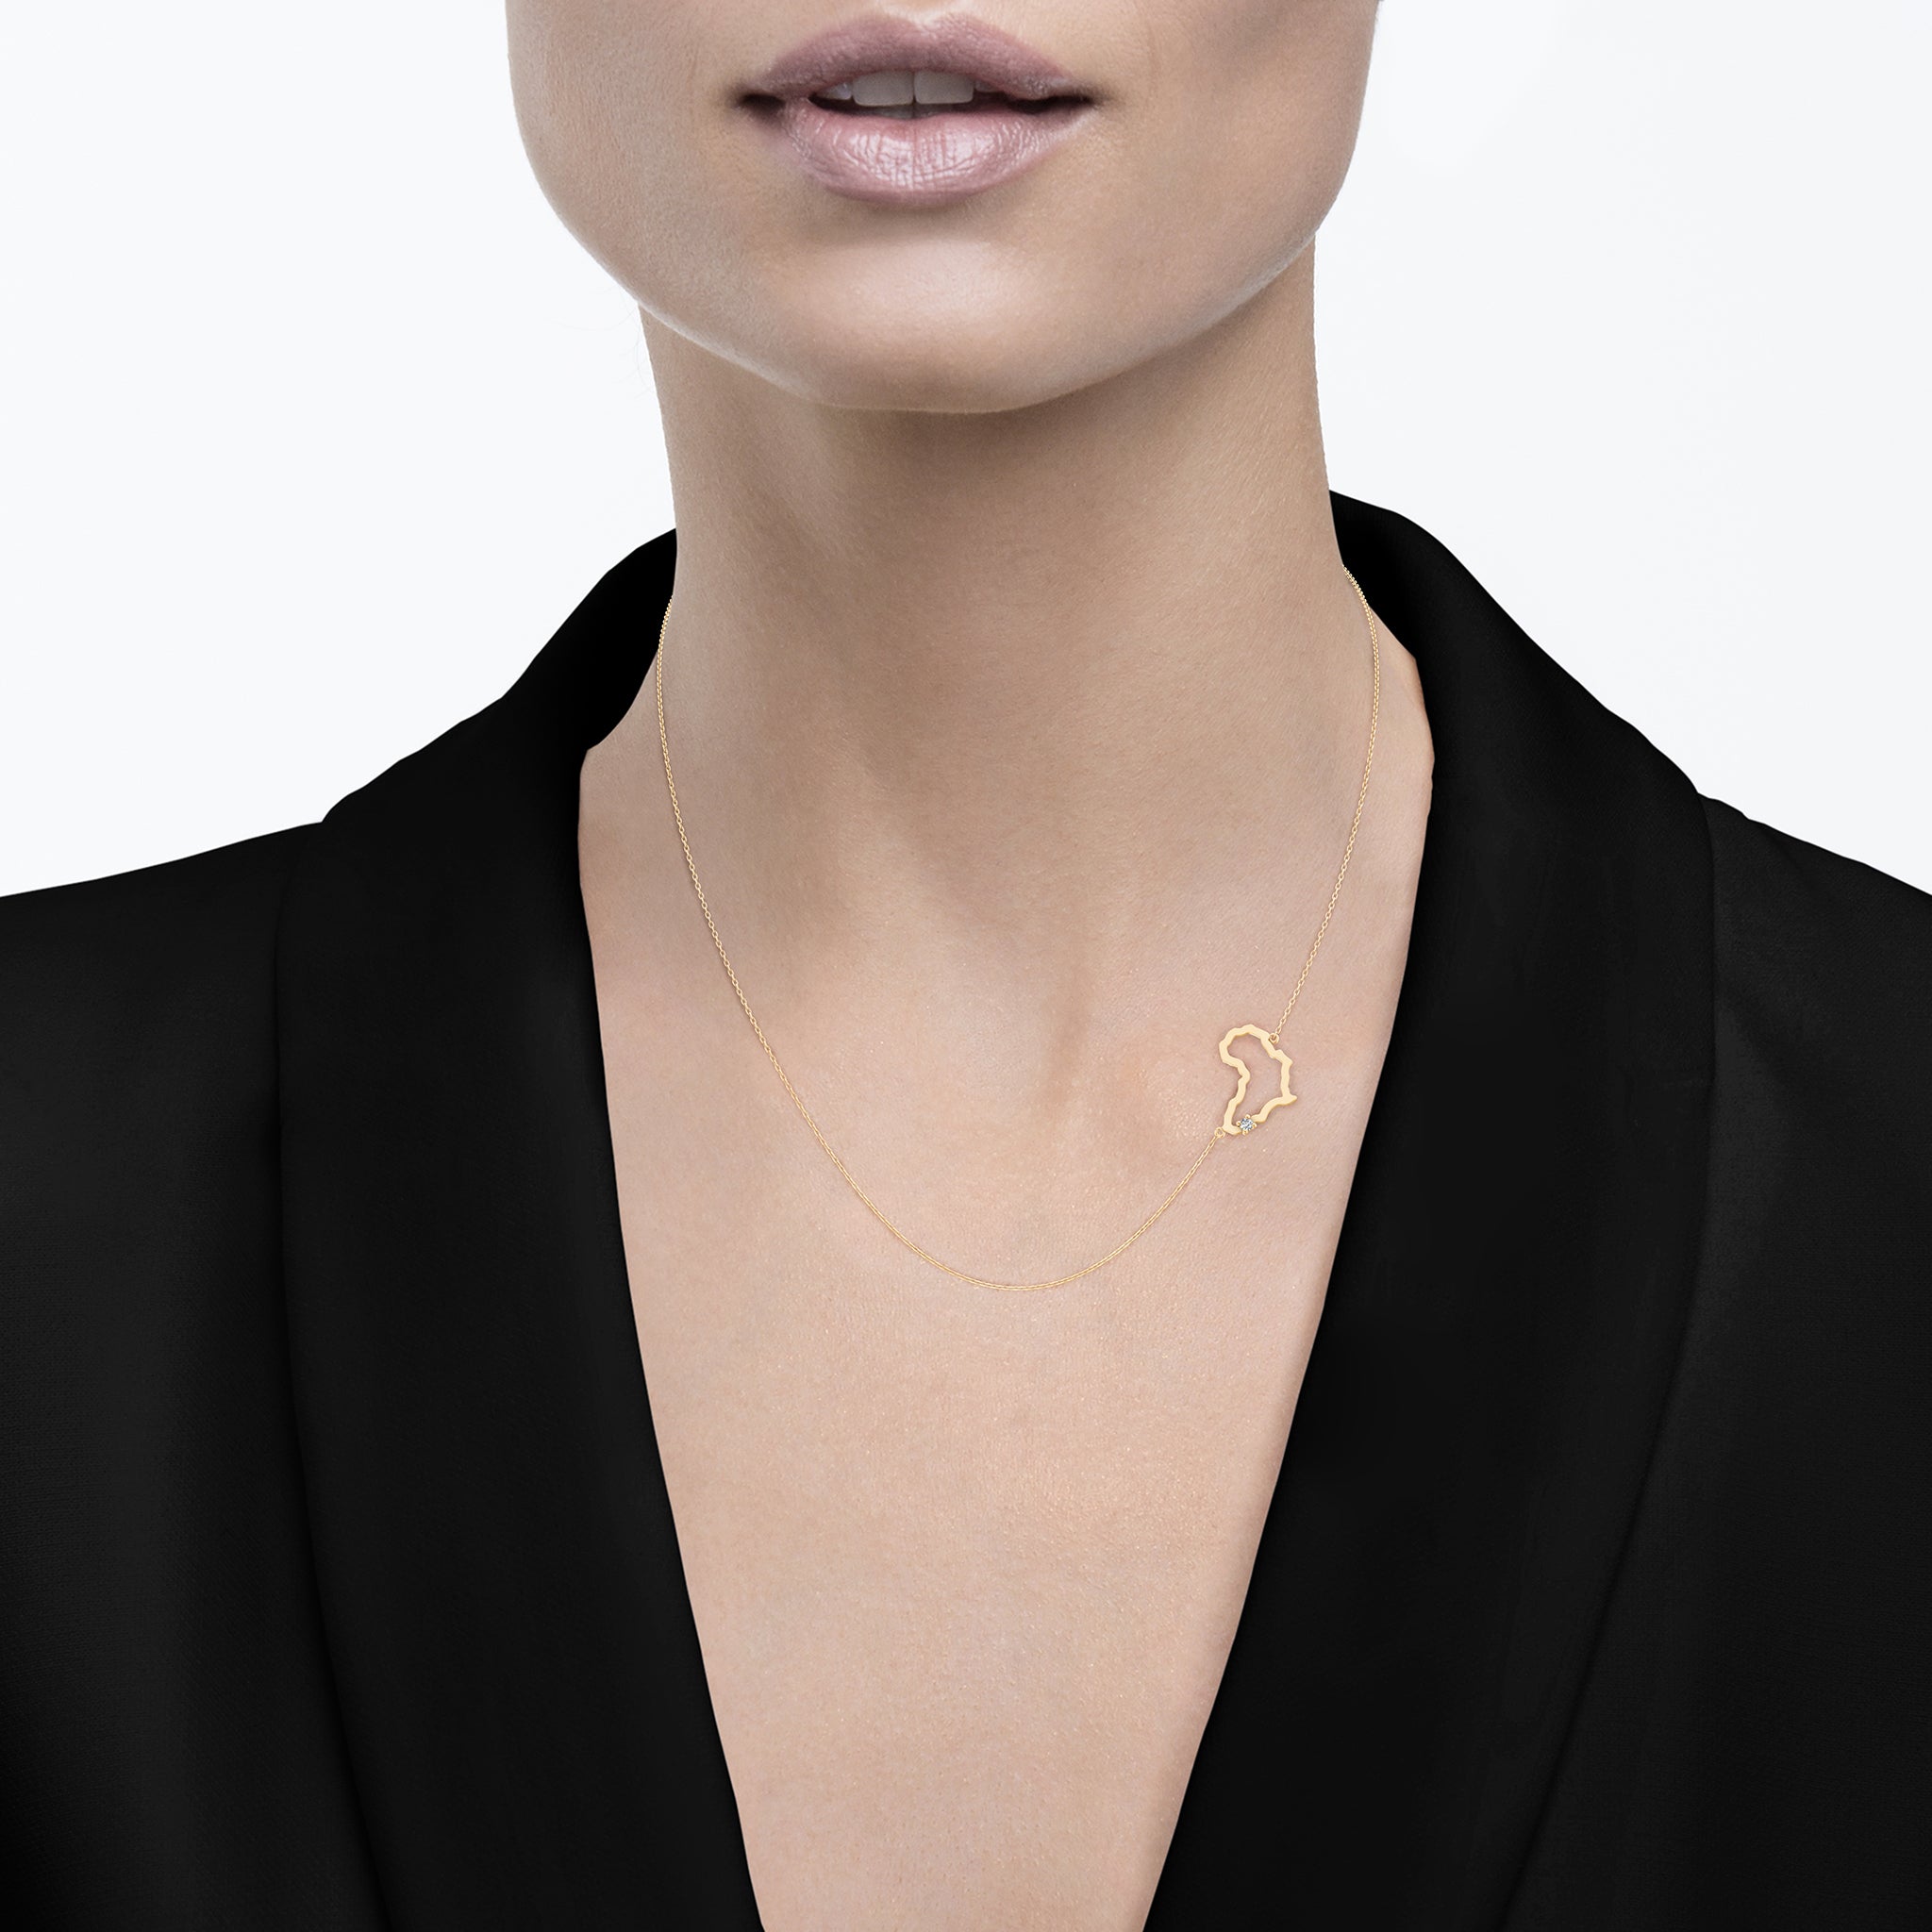 Shimansky - Women Wearing the My Africa Diamond Necklace Crafted in 14K Yellow Gold